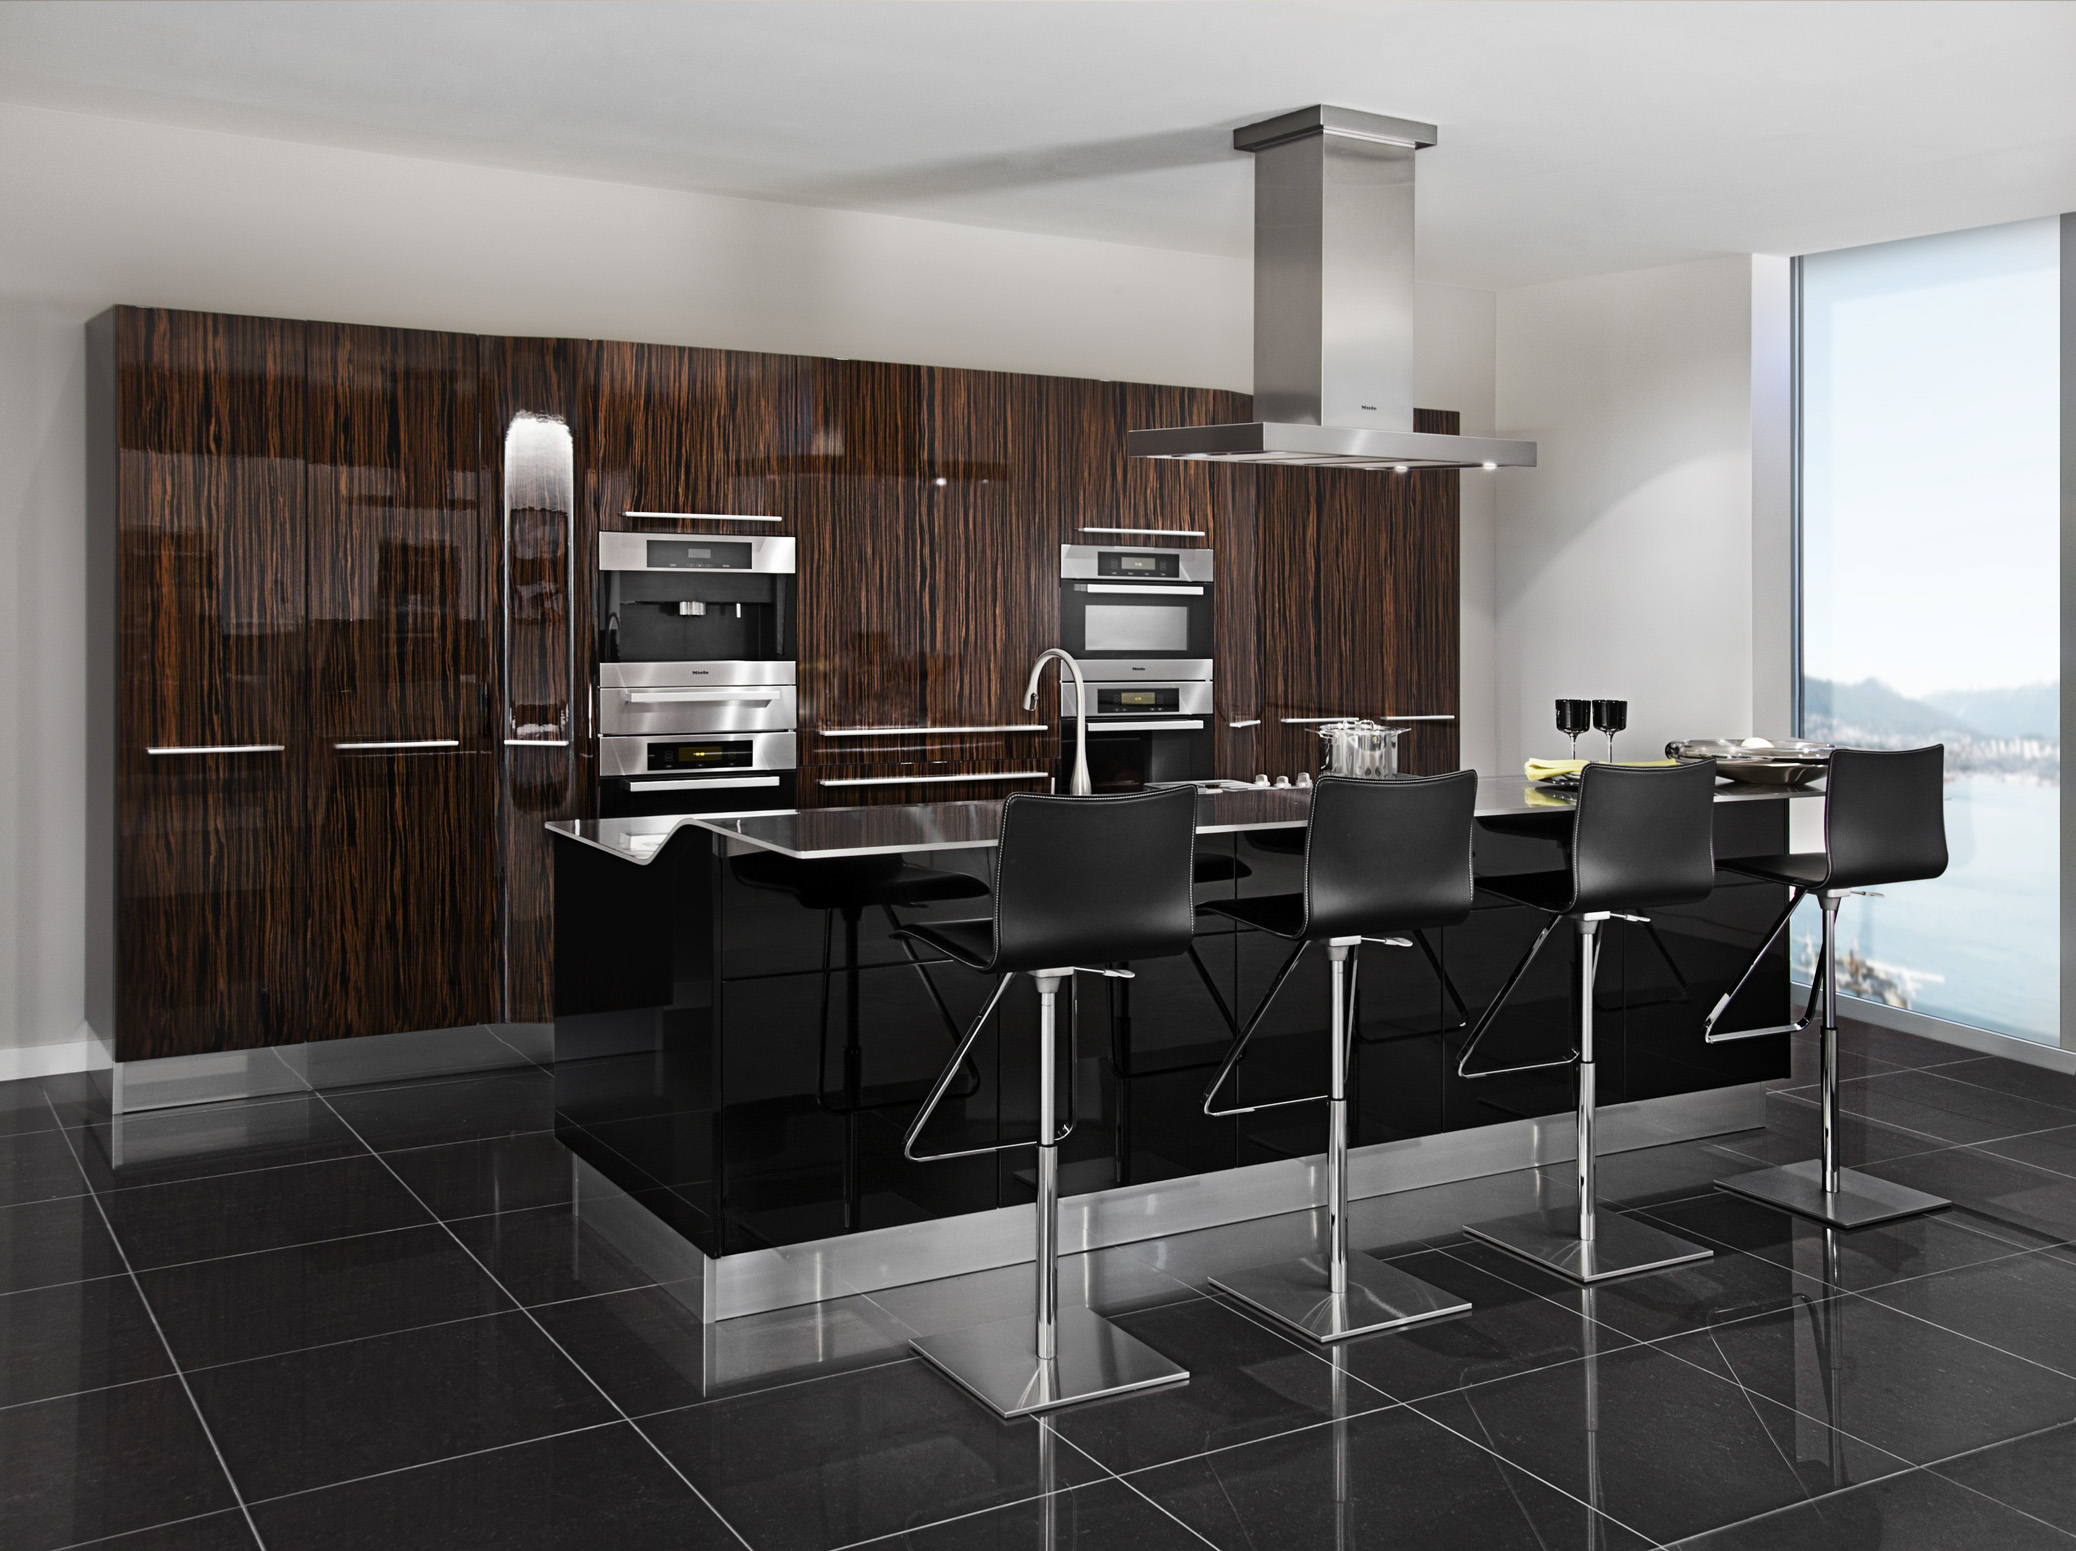 3D RENDERING of Modern Kitchen with Kitchen Island with Bar Stools